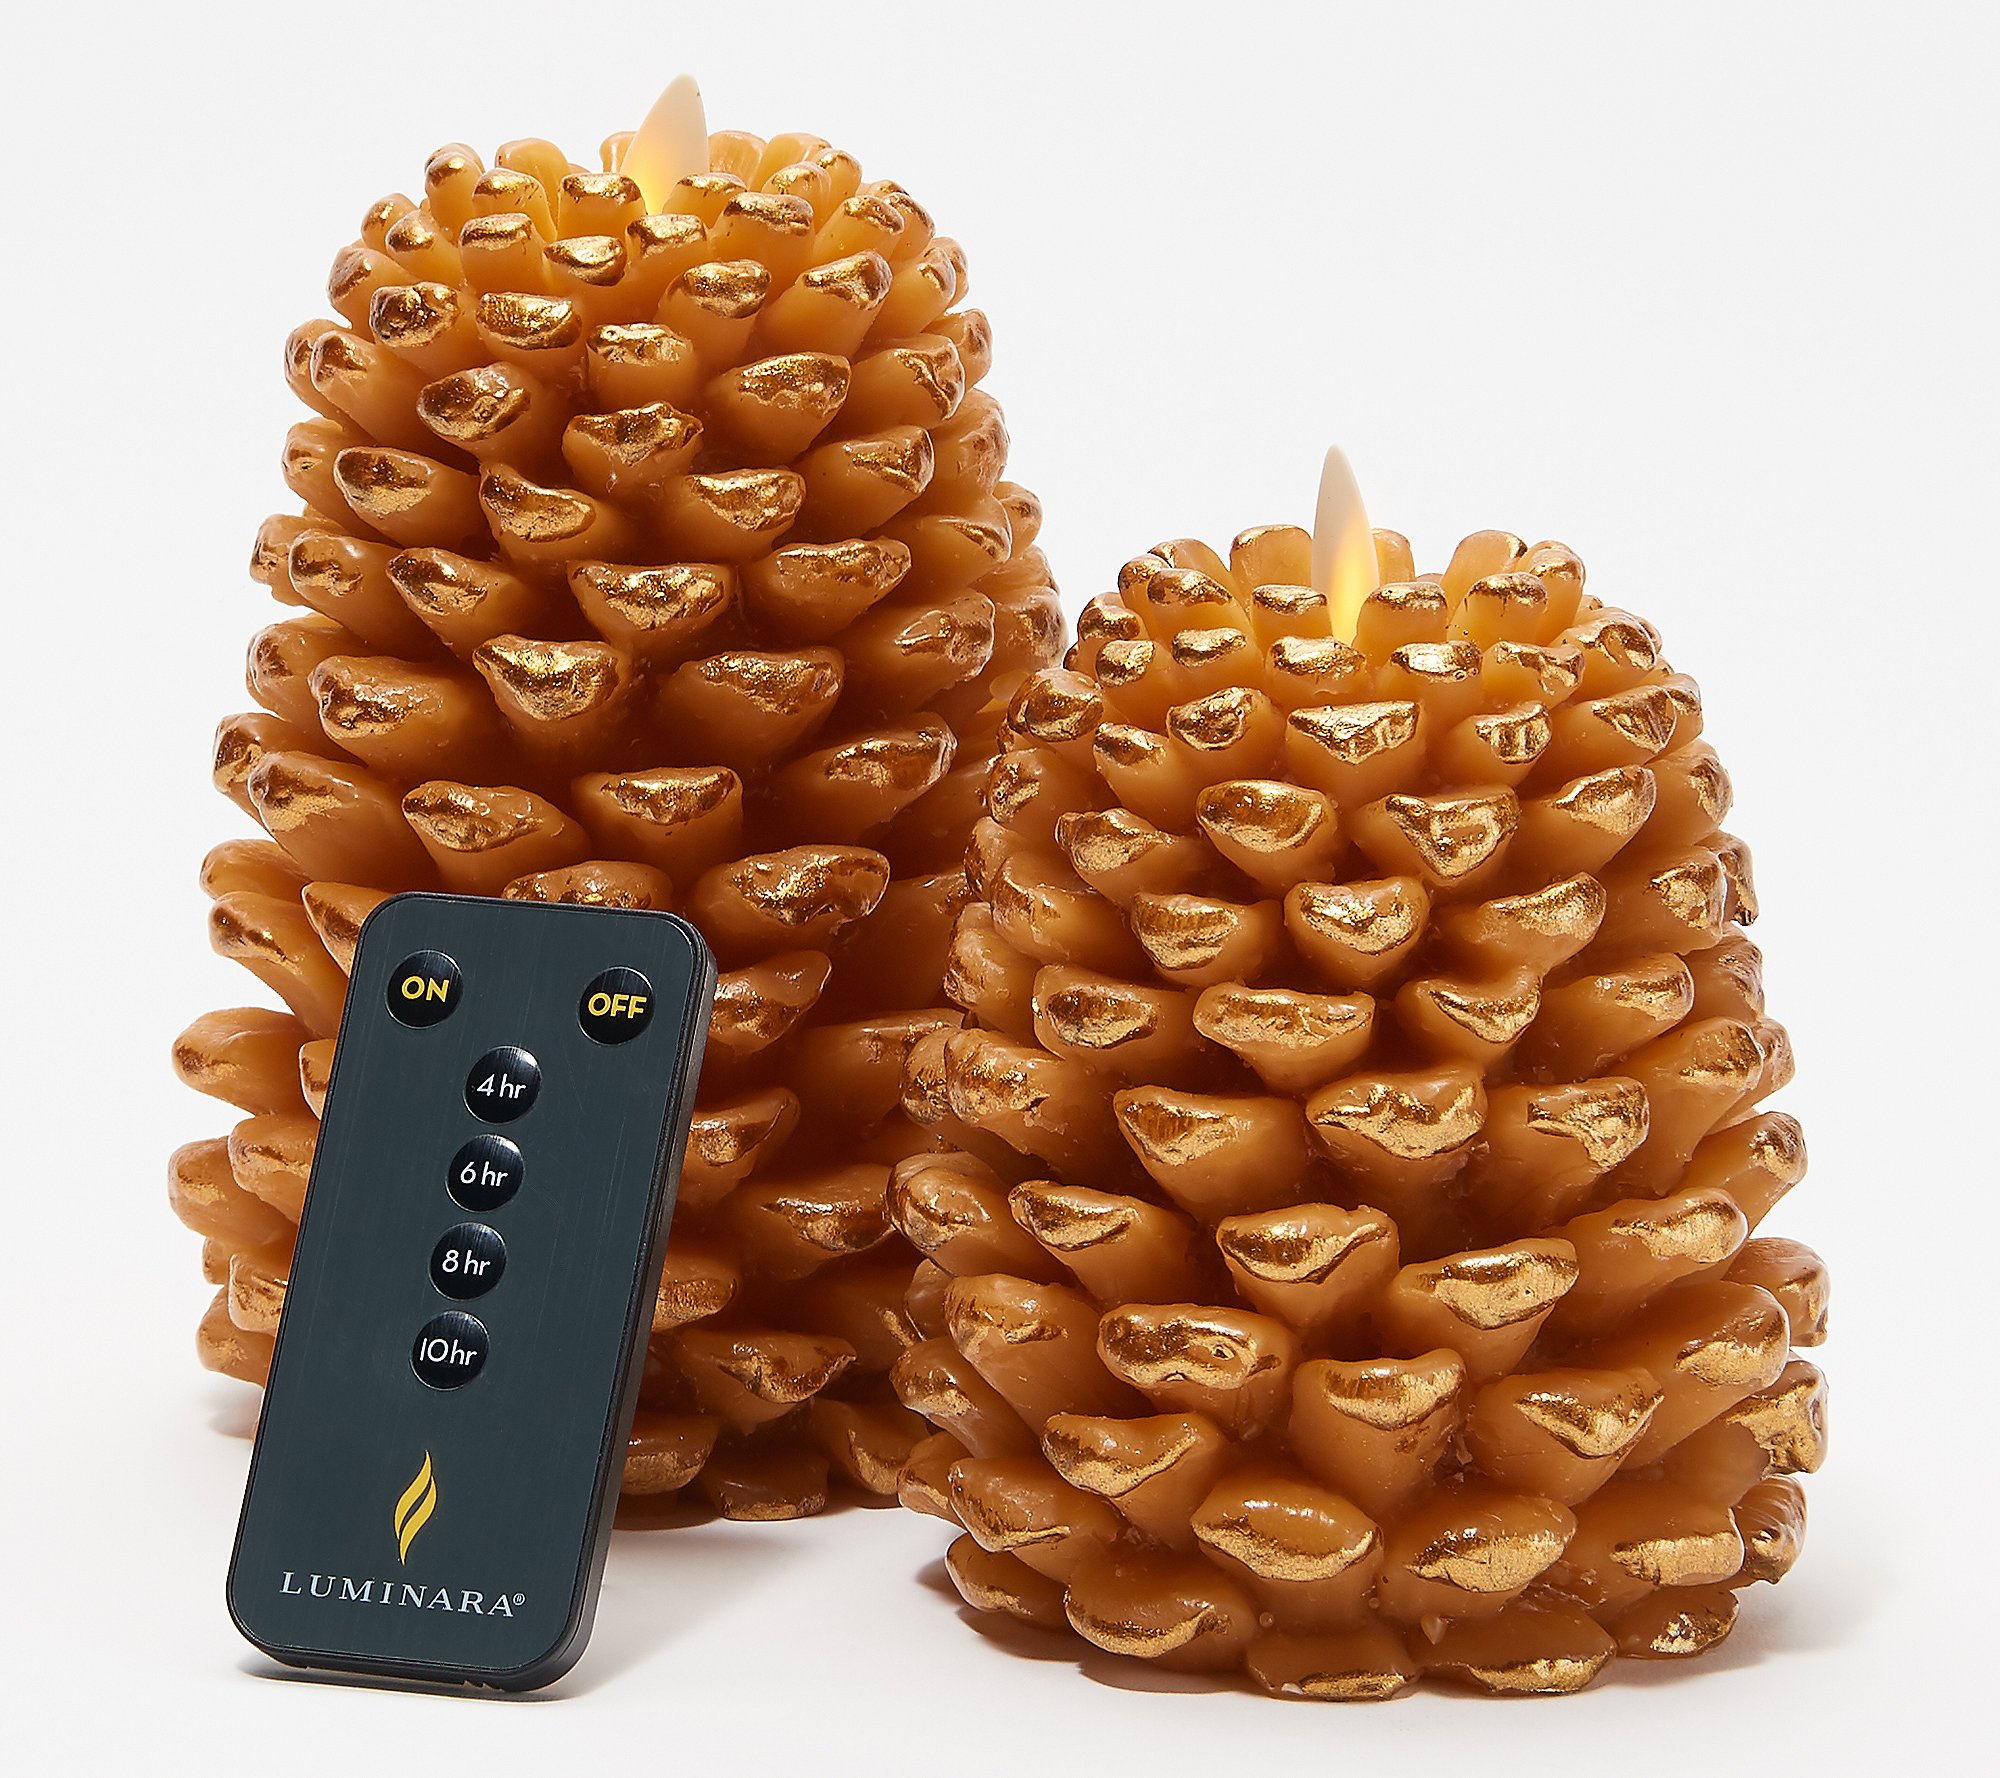 Brown & Gold Luminara Pine Cone Figural Wax Flameless Candle NEW REMOTE 